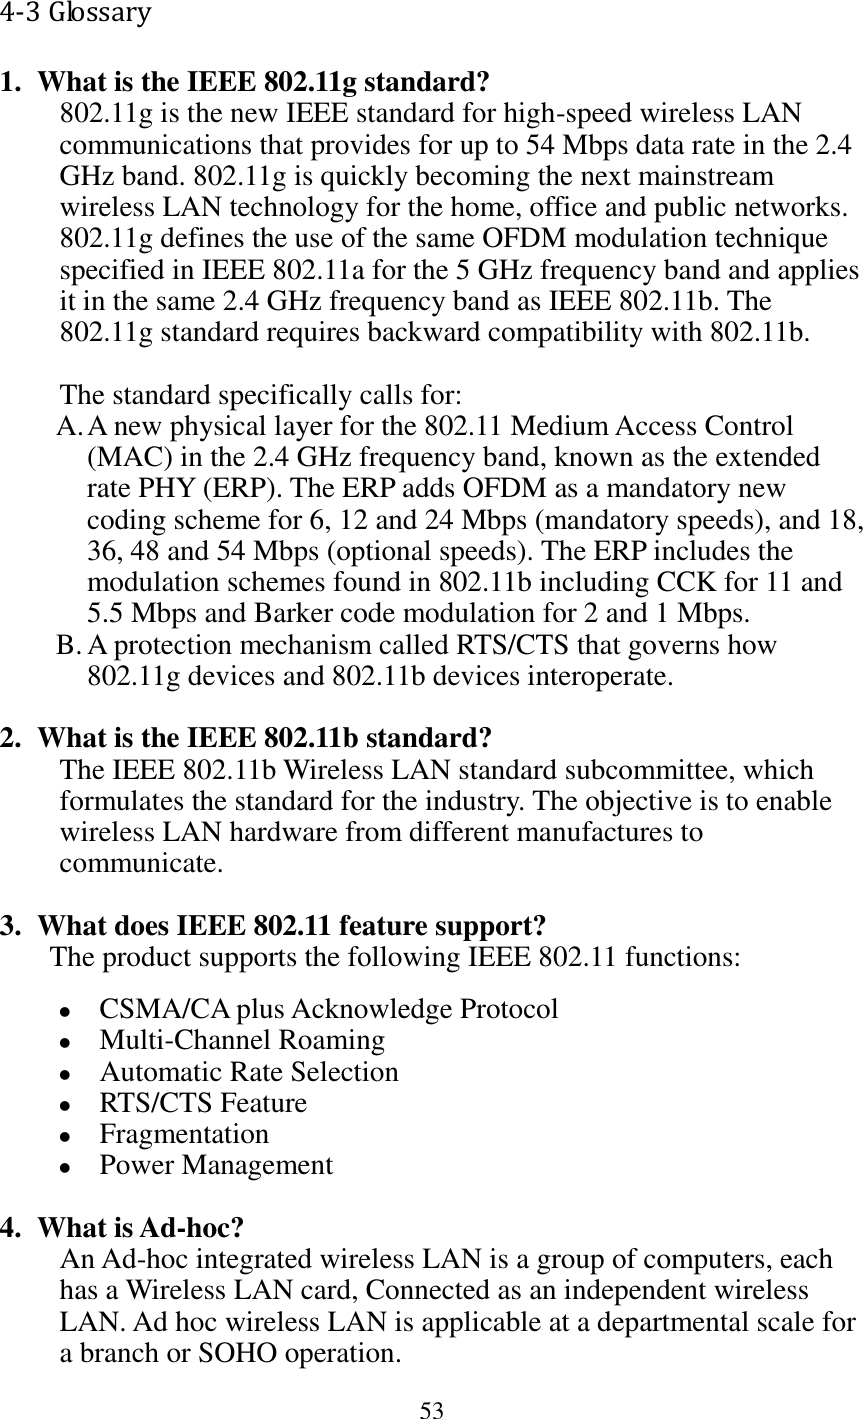 53  4-3 Glossary 1. What is the IEEE 802.11g standard? 802.11g is the new IEEE standard for high-speed wireless LAN communications that provides for up to 54 Mbps data rate in the 2.4 GHz band. 802.11g is quickly becoming the next mainstream wireless LAN technology for the home, office and public networks.   802.11g defines the use of the same OFDM modulation technique specified in IEEE 802.11a for the 5 GHz frequency band and applies it in the same 2.4 GHz frequency band as IEEE 802.11b. The 802.11g standard requires backward compatibility with 802.11b.  The standard specifically calls for:   A. A new physical layer for the 802.11 Medium Access Control (MAC) in the 2.4 GHz frequency band, known as the extended rate PHY (ERP). The ERP adds OFDM as a mandatory new coding scheme for 6, 12 and 24 Mbps (mandatory speeds), and 18, 36, 48 and 54 Mbps (optional speeds). The ERP includes the modulation schemes found in 802.11b including CCK for 11 and 5.5 Mbps and Barker code modulation for 2 and 1 Mbps. B. A protection mechanism called RTS/CTS that governs how 802.11g devices and 802.11b devices interoperate.  2. What is the IEEE 802.11b standard? The IEEE 802.11b Wireless LAN standard subcommittee, which formulates the standard for the industry. The objective is to enable wireless LAN hardware from different manufactures to communicate.  3. What does IEEE 802.11 feature support? The product supports the following IEEE 802.11 functions:  CSMA/CA plus Acknowledge Protocol  Multi-Channel Roaming  Automatic Rate Selection  RTS/CTS Feature  Fragmentation  Power Management  4. What is Ad-hoc? An Ad-hoc integrated wireless LAN is a group of computers, each has a Wireless LAN card, Connected as an independent wireless LAN. Ad hoc wireless LAN is applicable at a departmental scale for a branch or SOHO operation. 